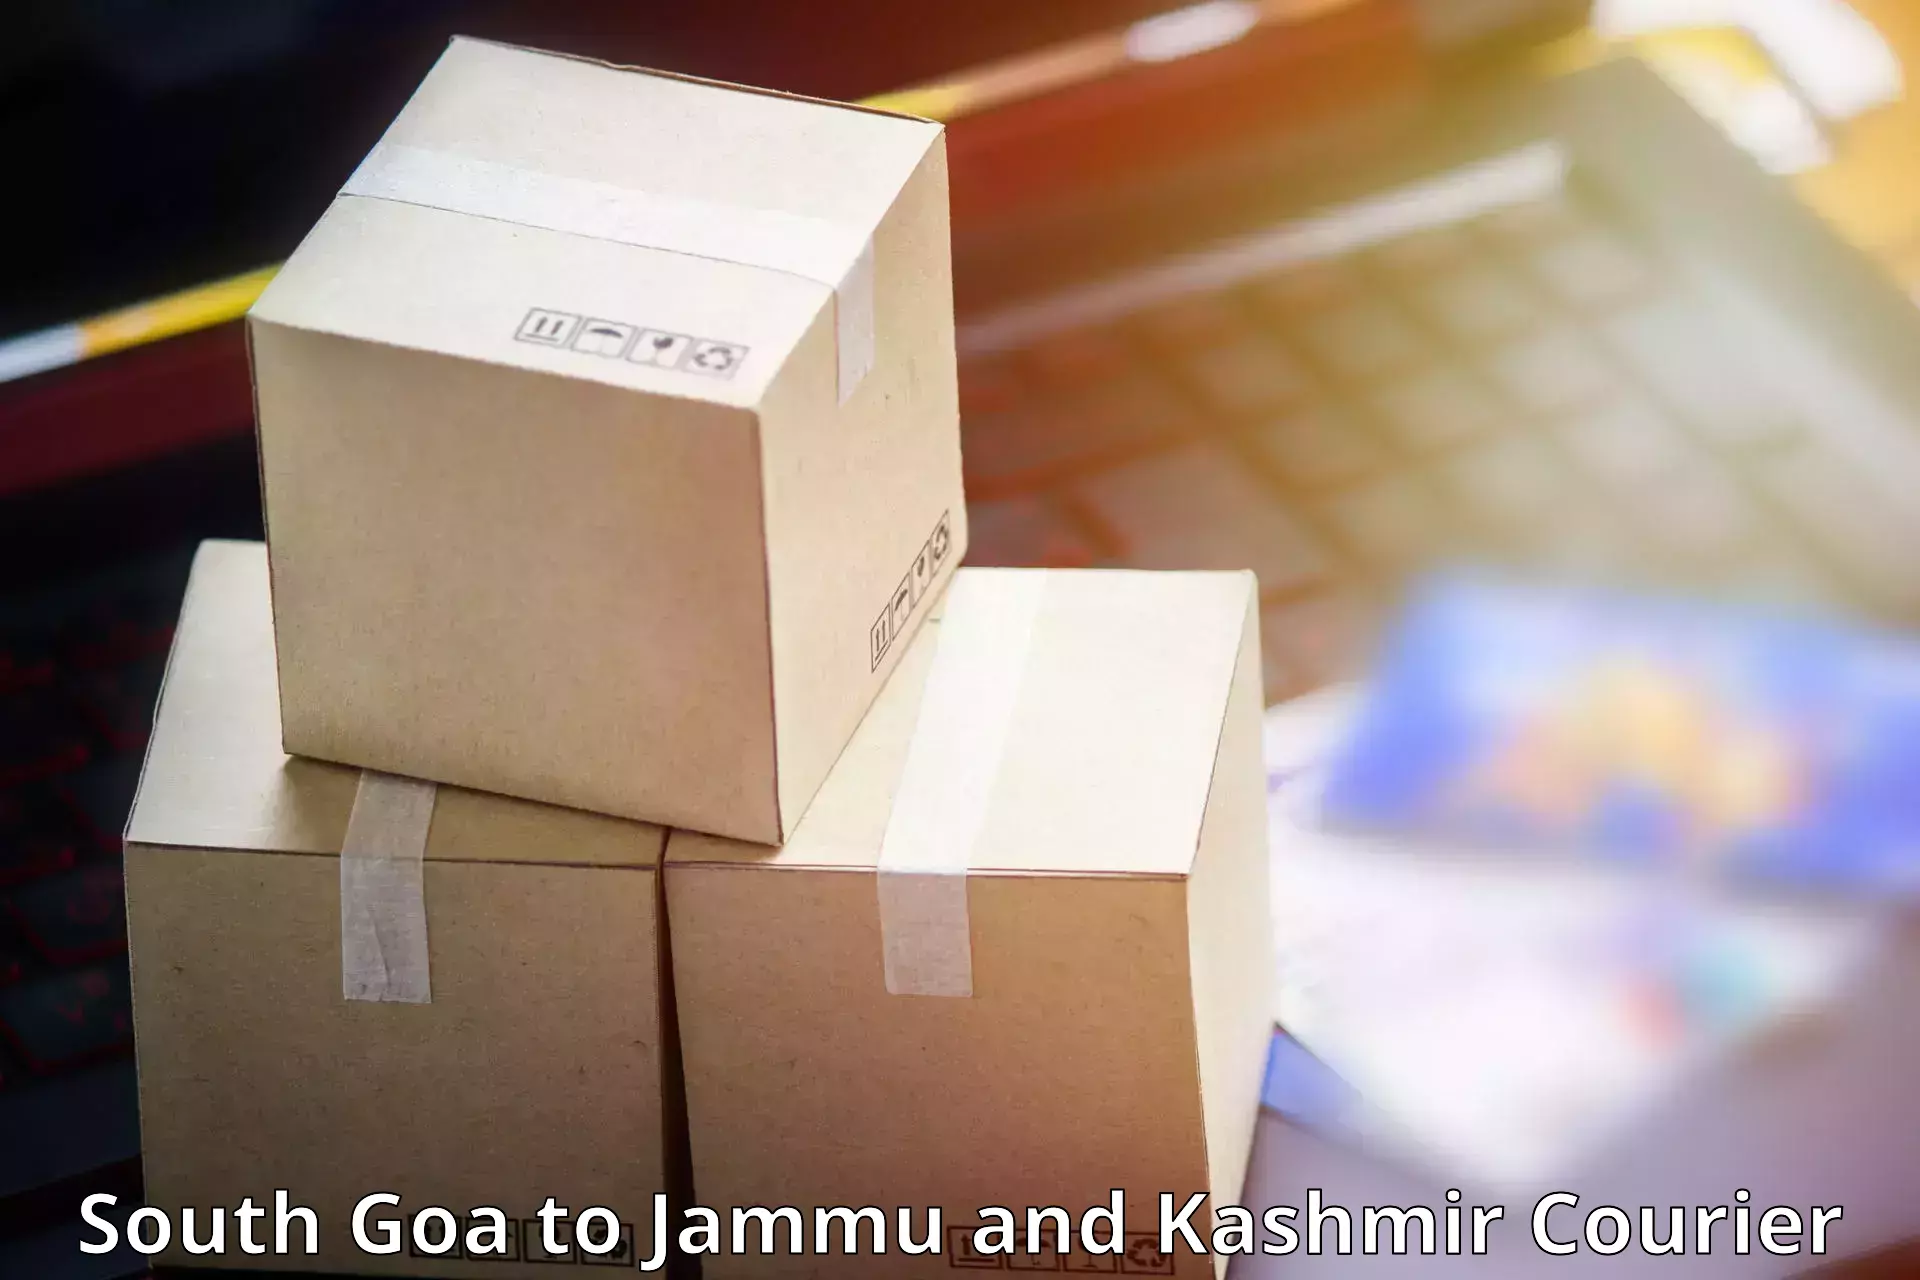 Expedited shipping methods in South Goa to Srinagar Kashmir